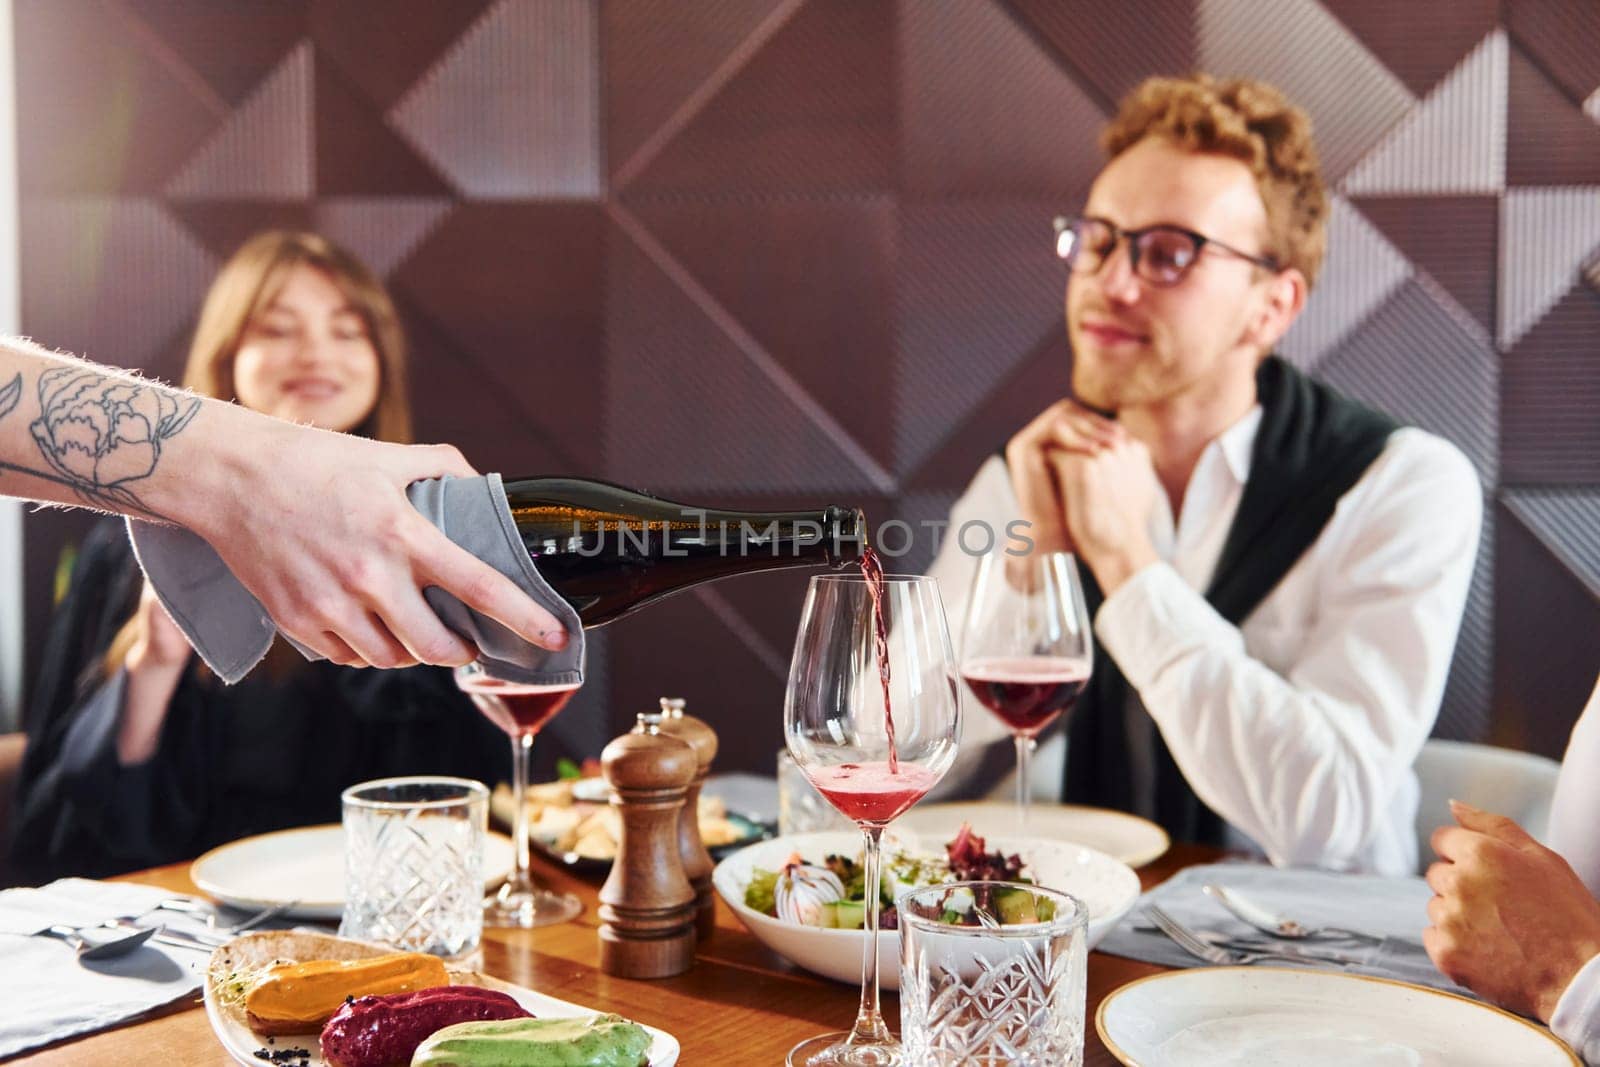 People have a dinner together. Indoors of new modern luxury restaurant.